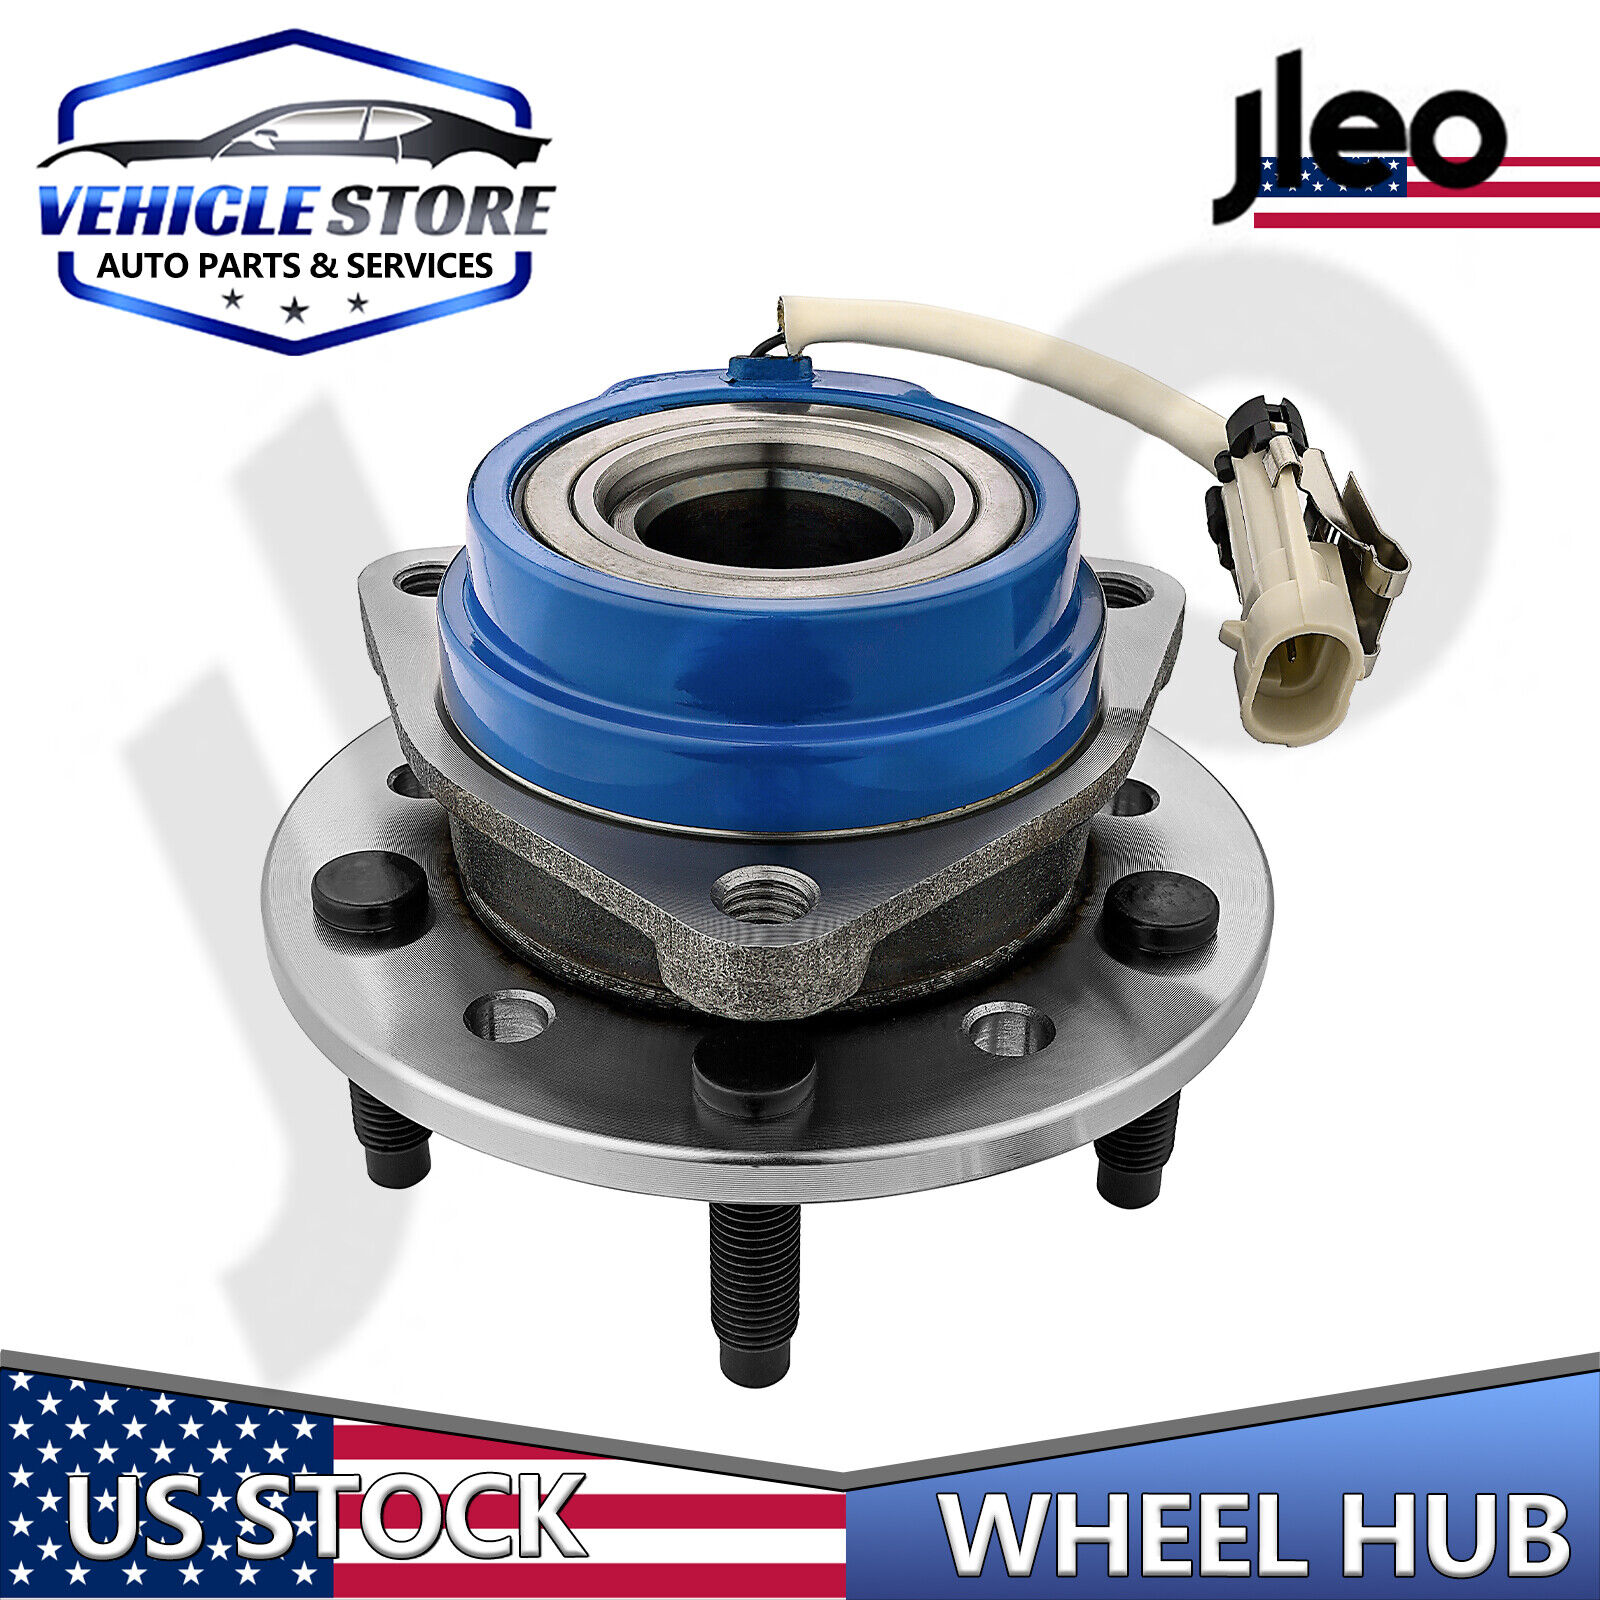 Front Wheel Hub Bearing for 1999-2004 Olds Alero Pontiac Grand Am Chevy Classic